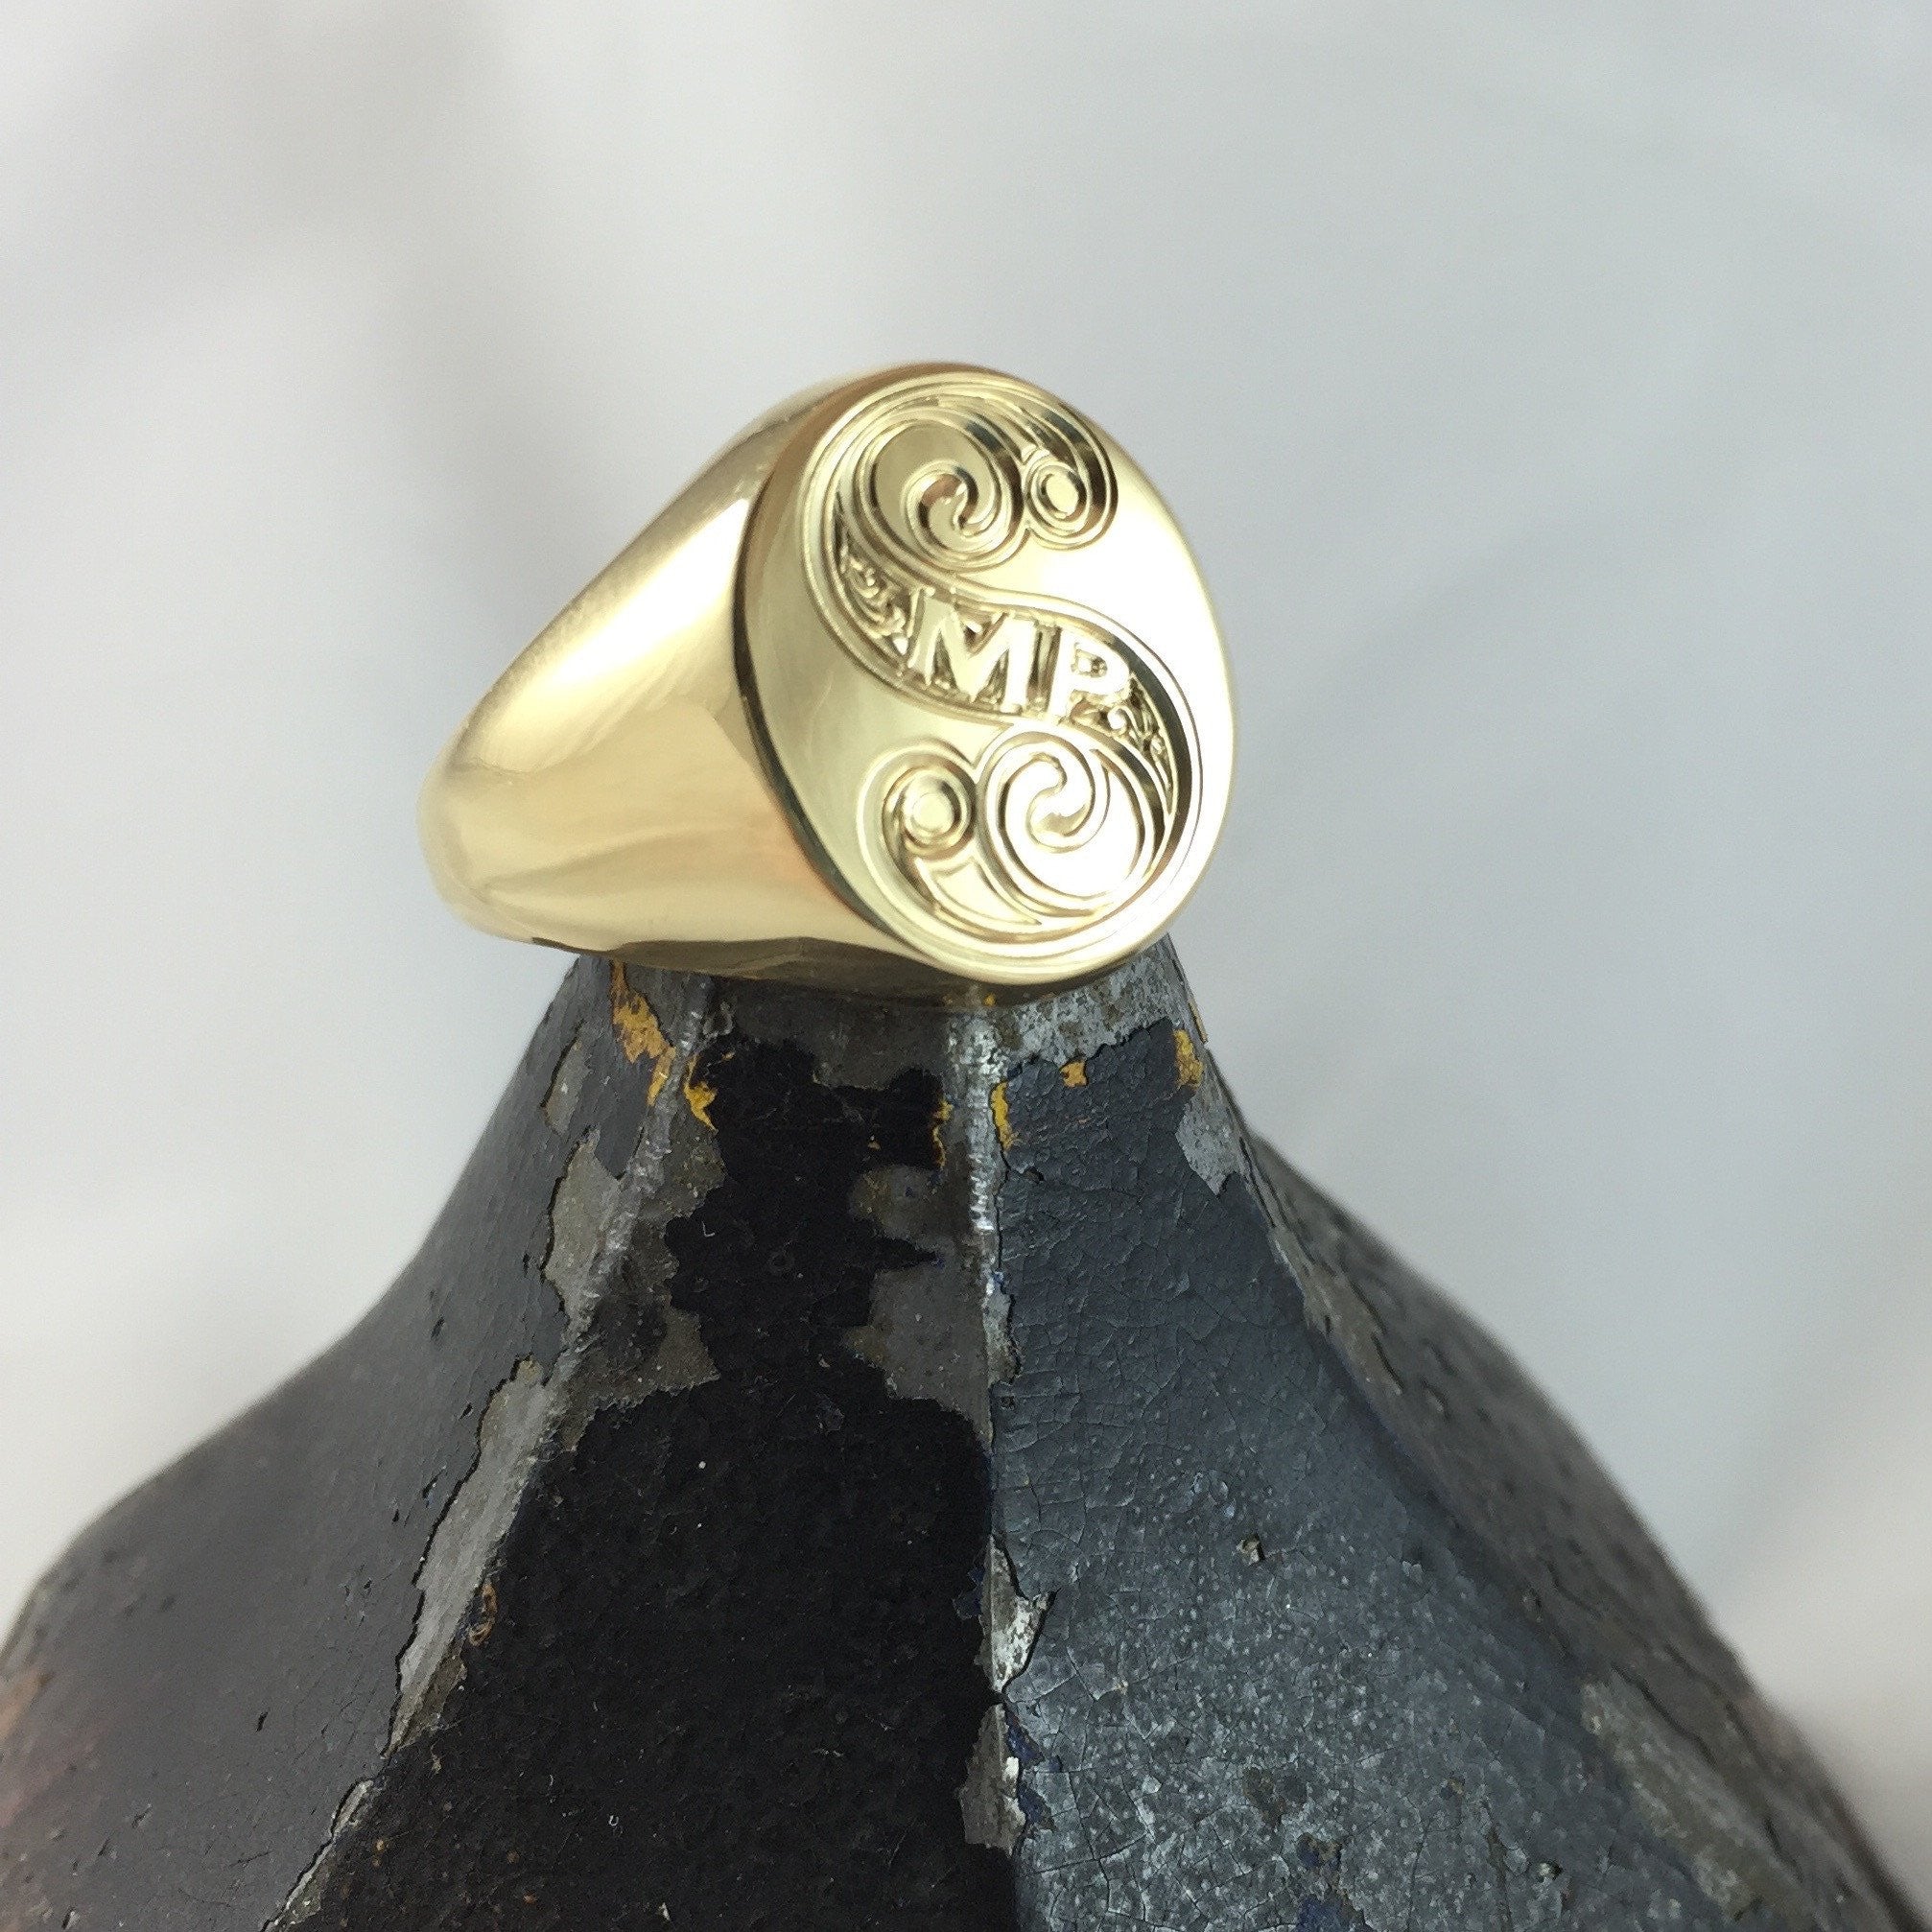 4 Initials Engraved 16mm x 13mm - 18 Carat Yellow Gold Signet Ring ...